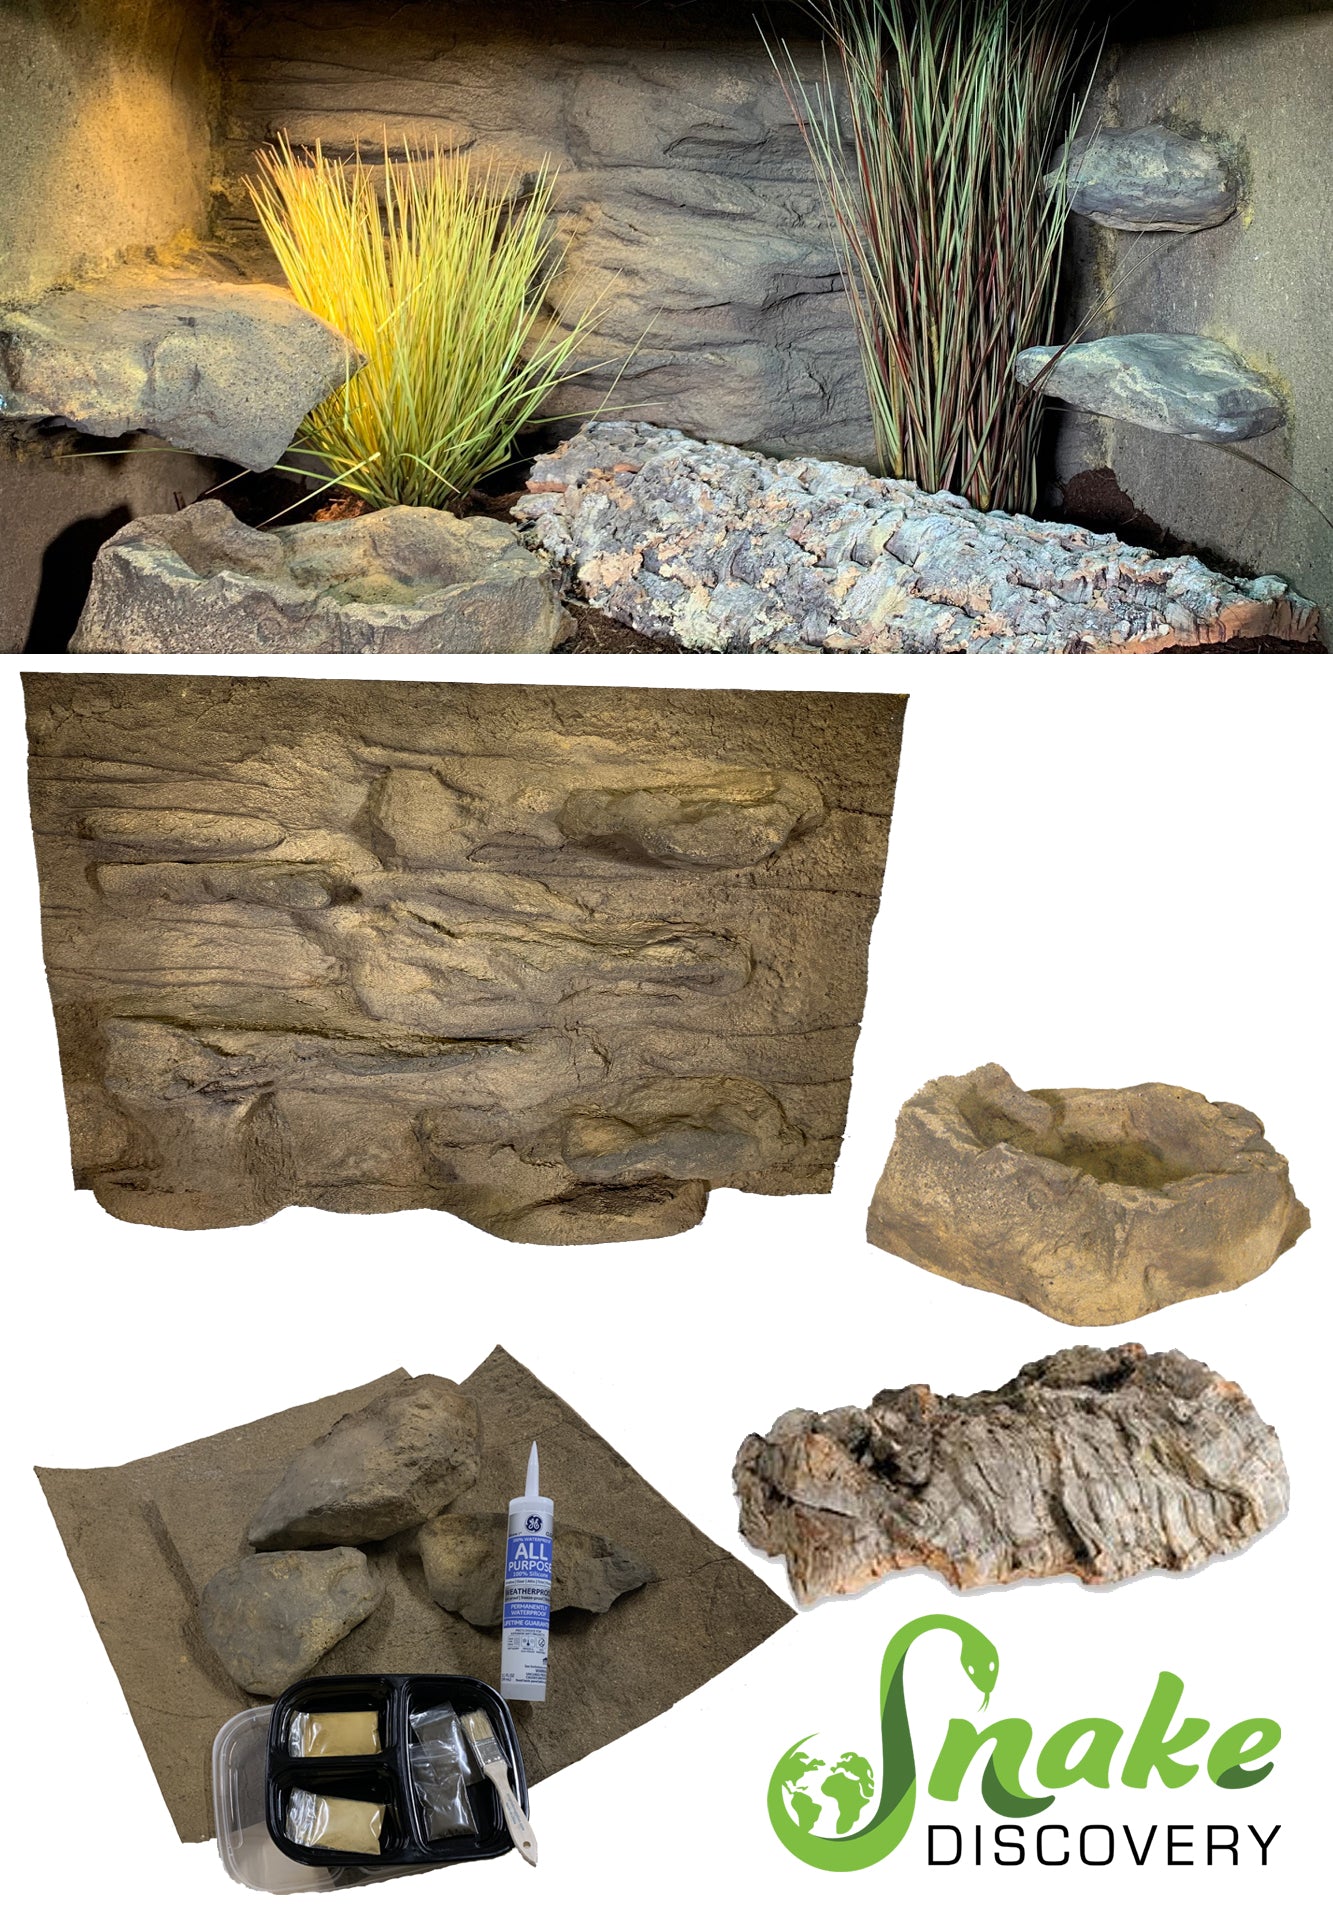 Snake Discovery – 3 Foot Reptile Décor Kit without Plants